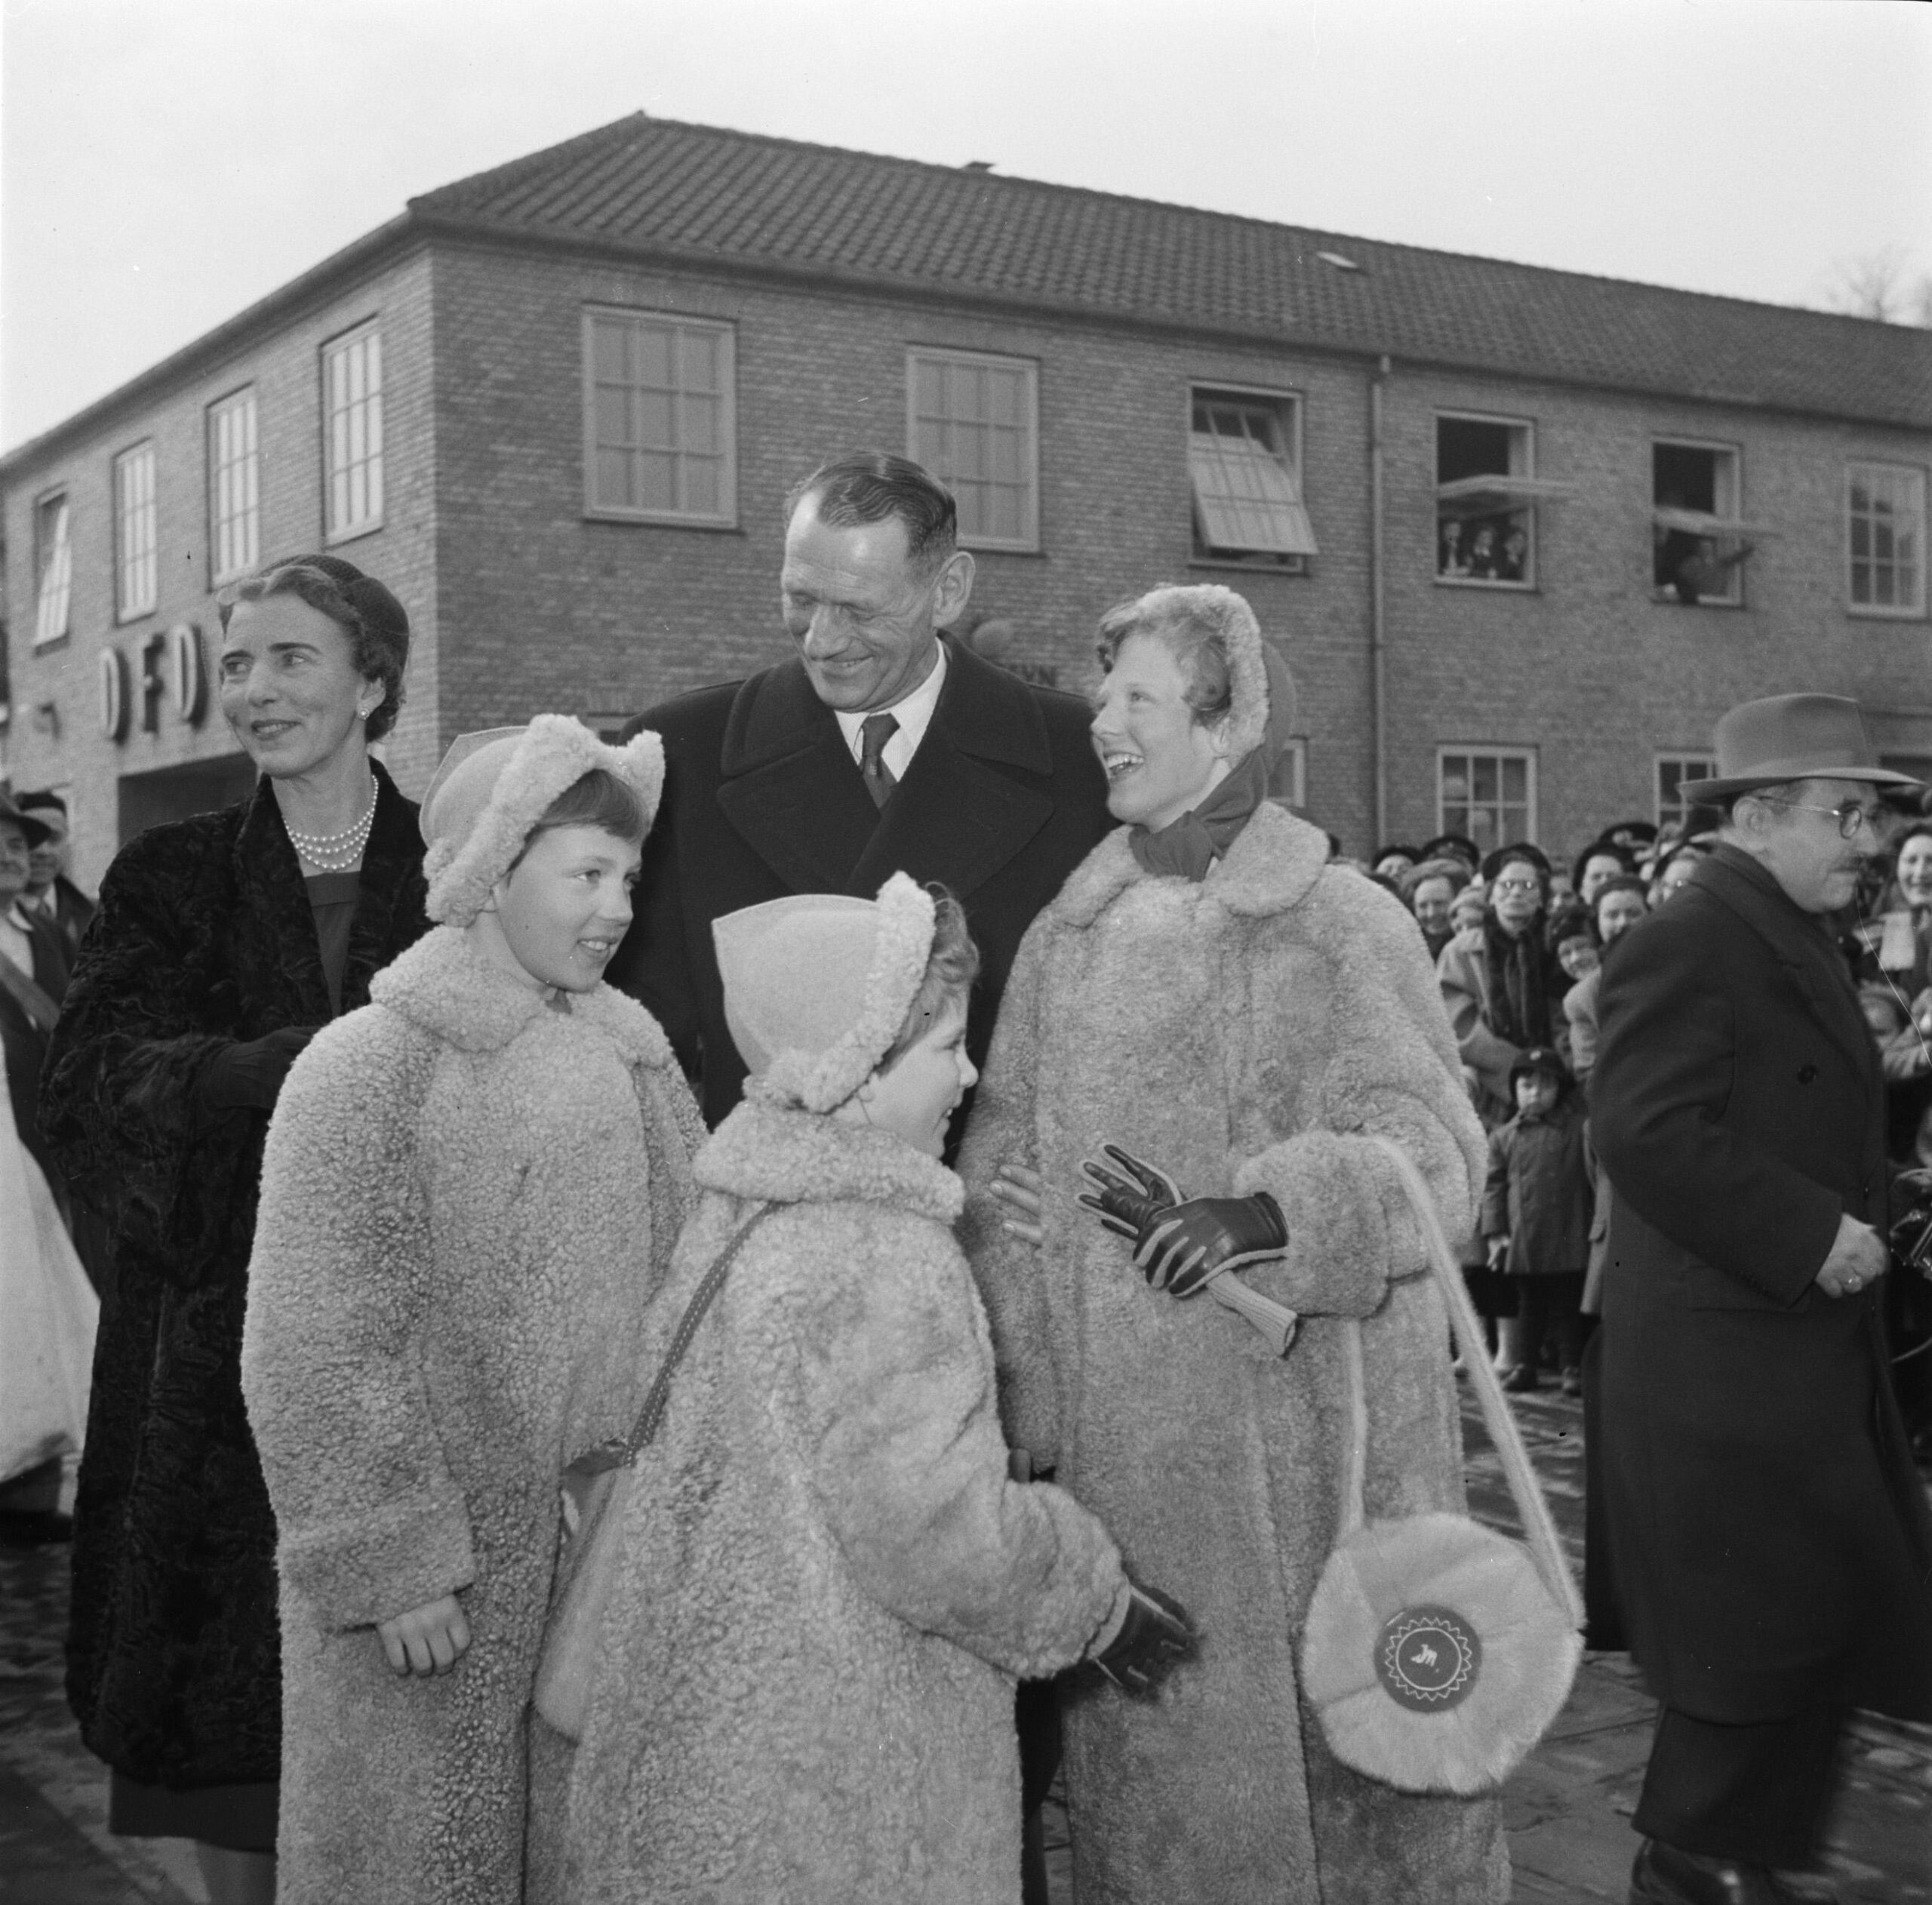 King Frederik IX with his wife Queen Ingrid and daughters, Margrethe and Anne Marie, in 1954